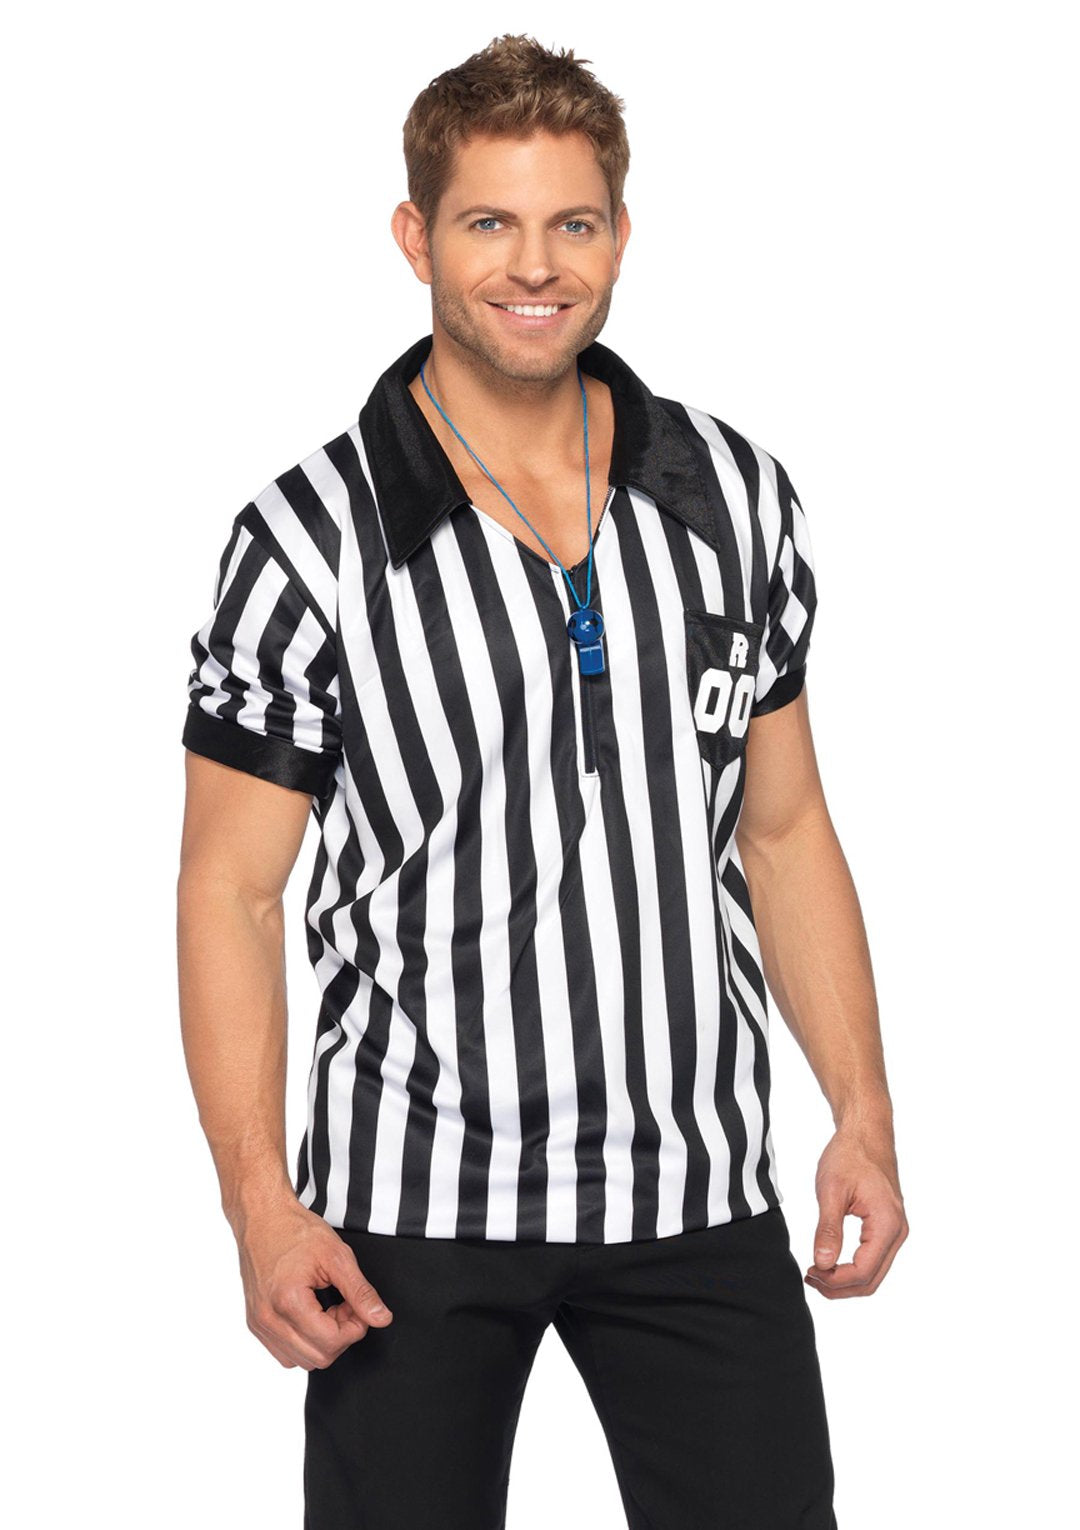 Men's Referee Shirt and Whistle